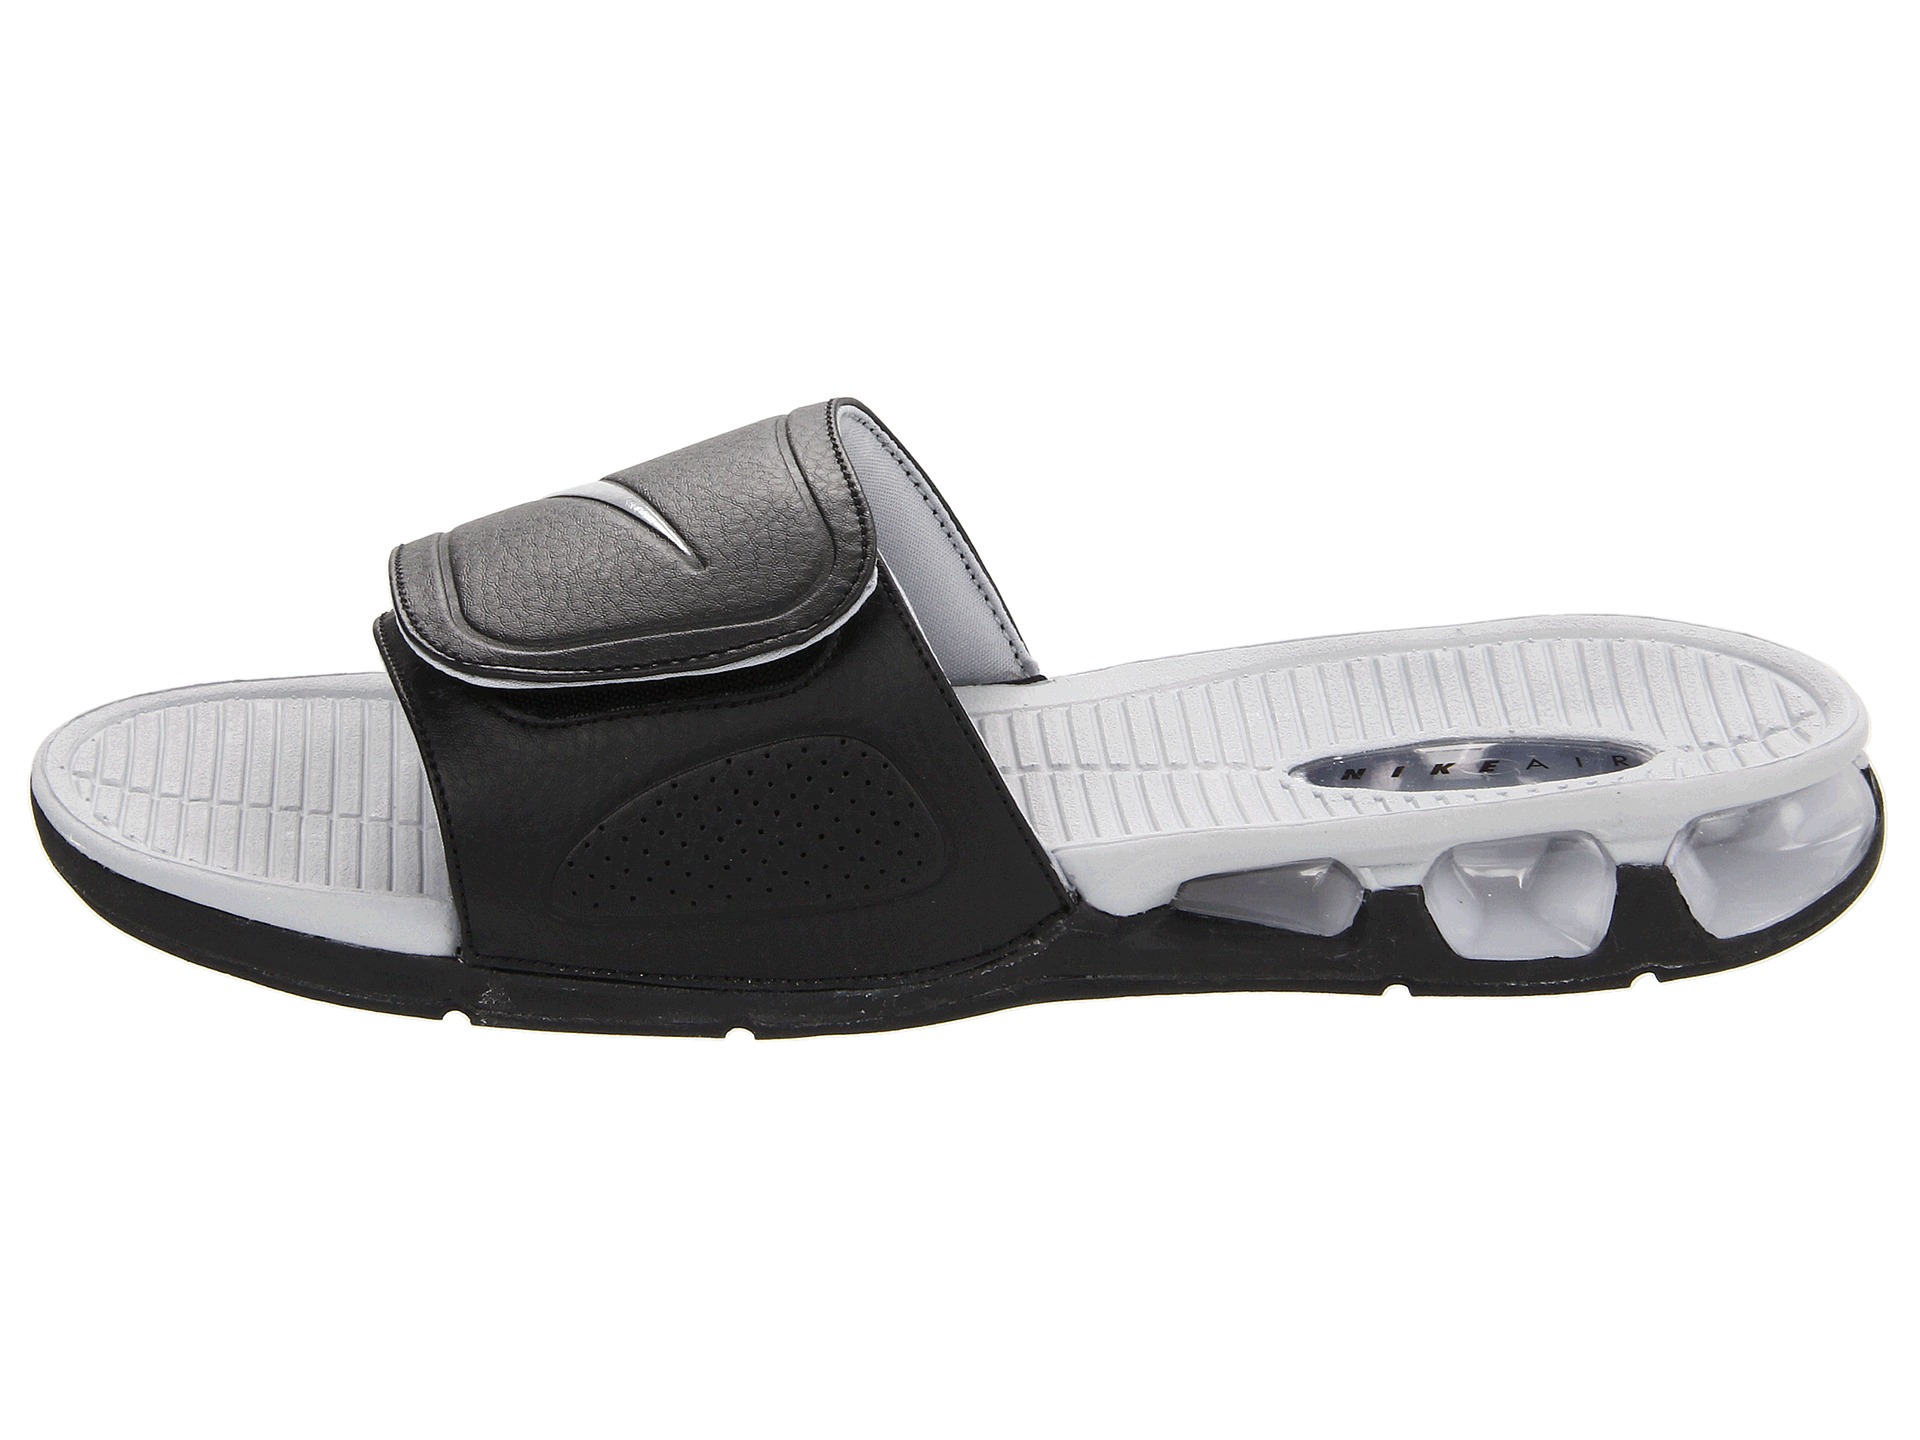 nike slides with bubble